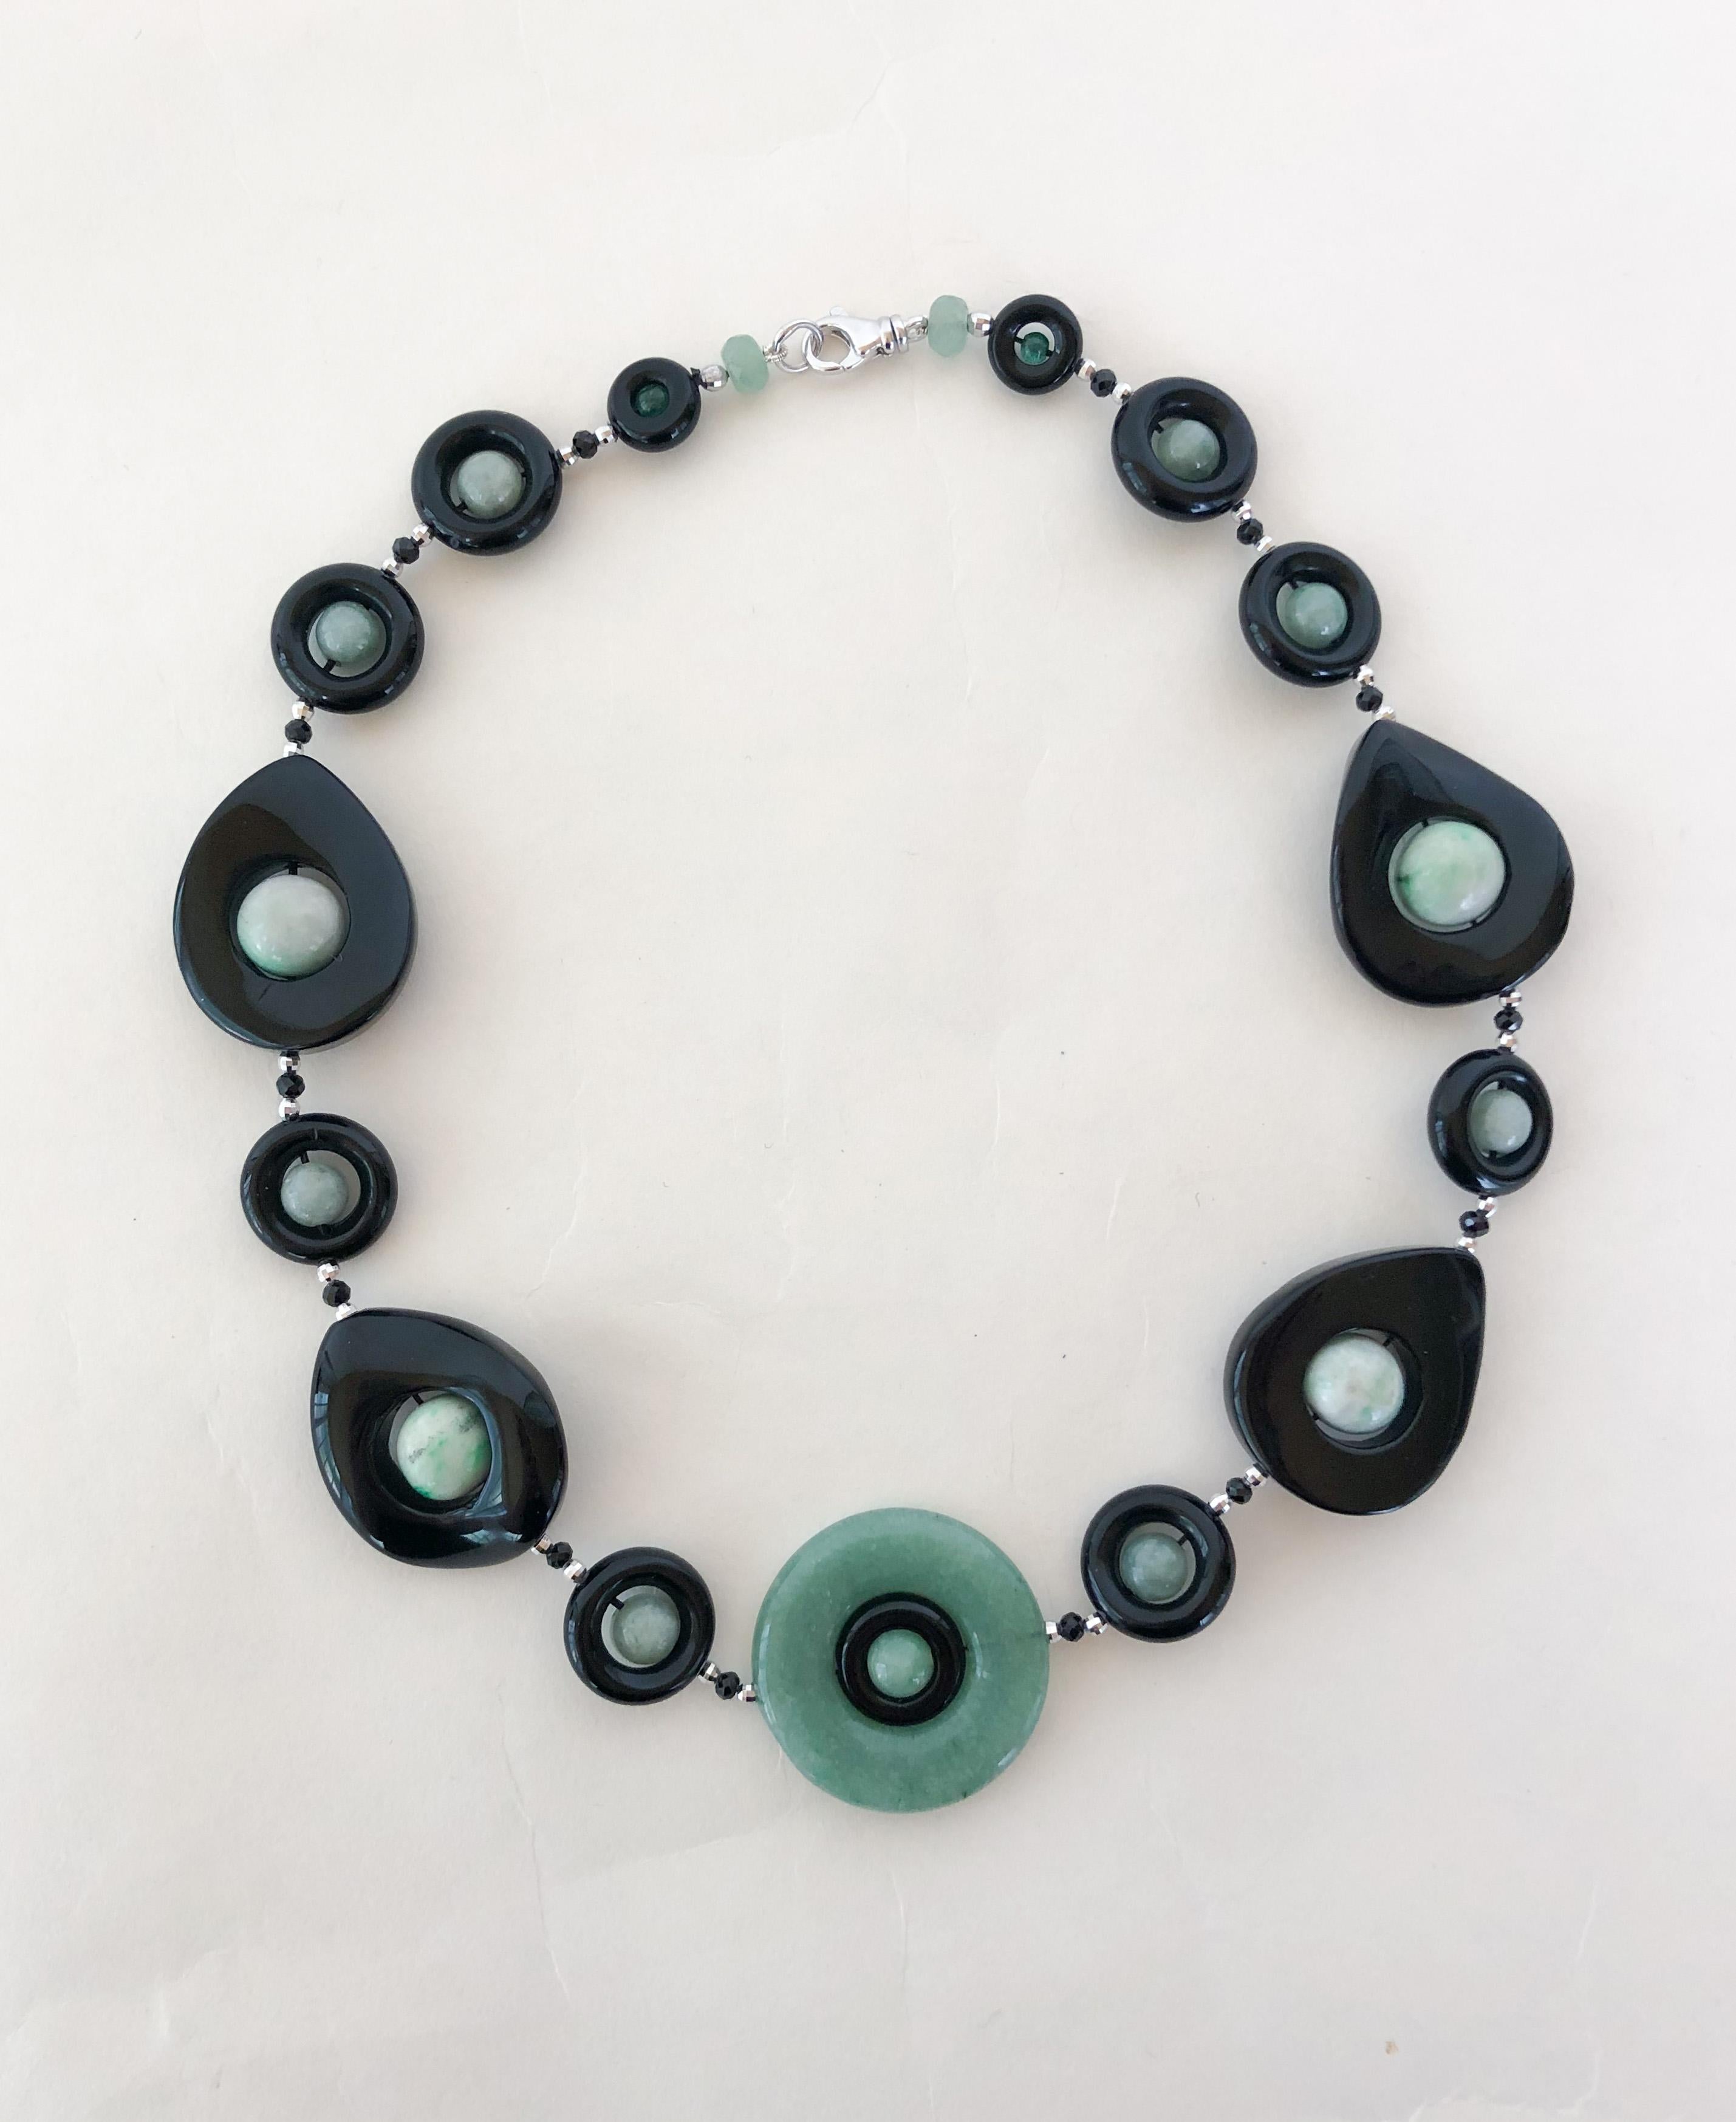 Brilliant Cut Marina J. Jade and Black Onyx Necklace with Silver Rhodium-Plated Clasp